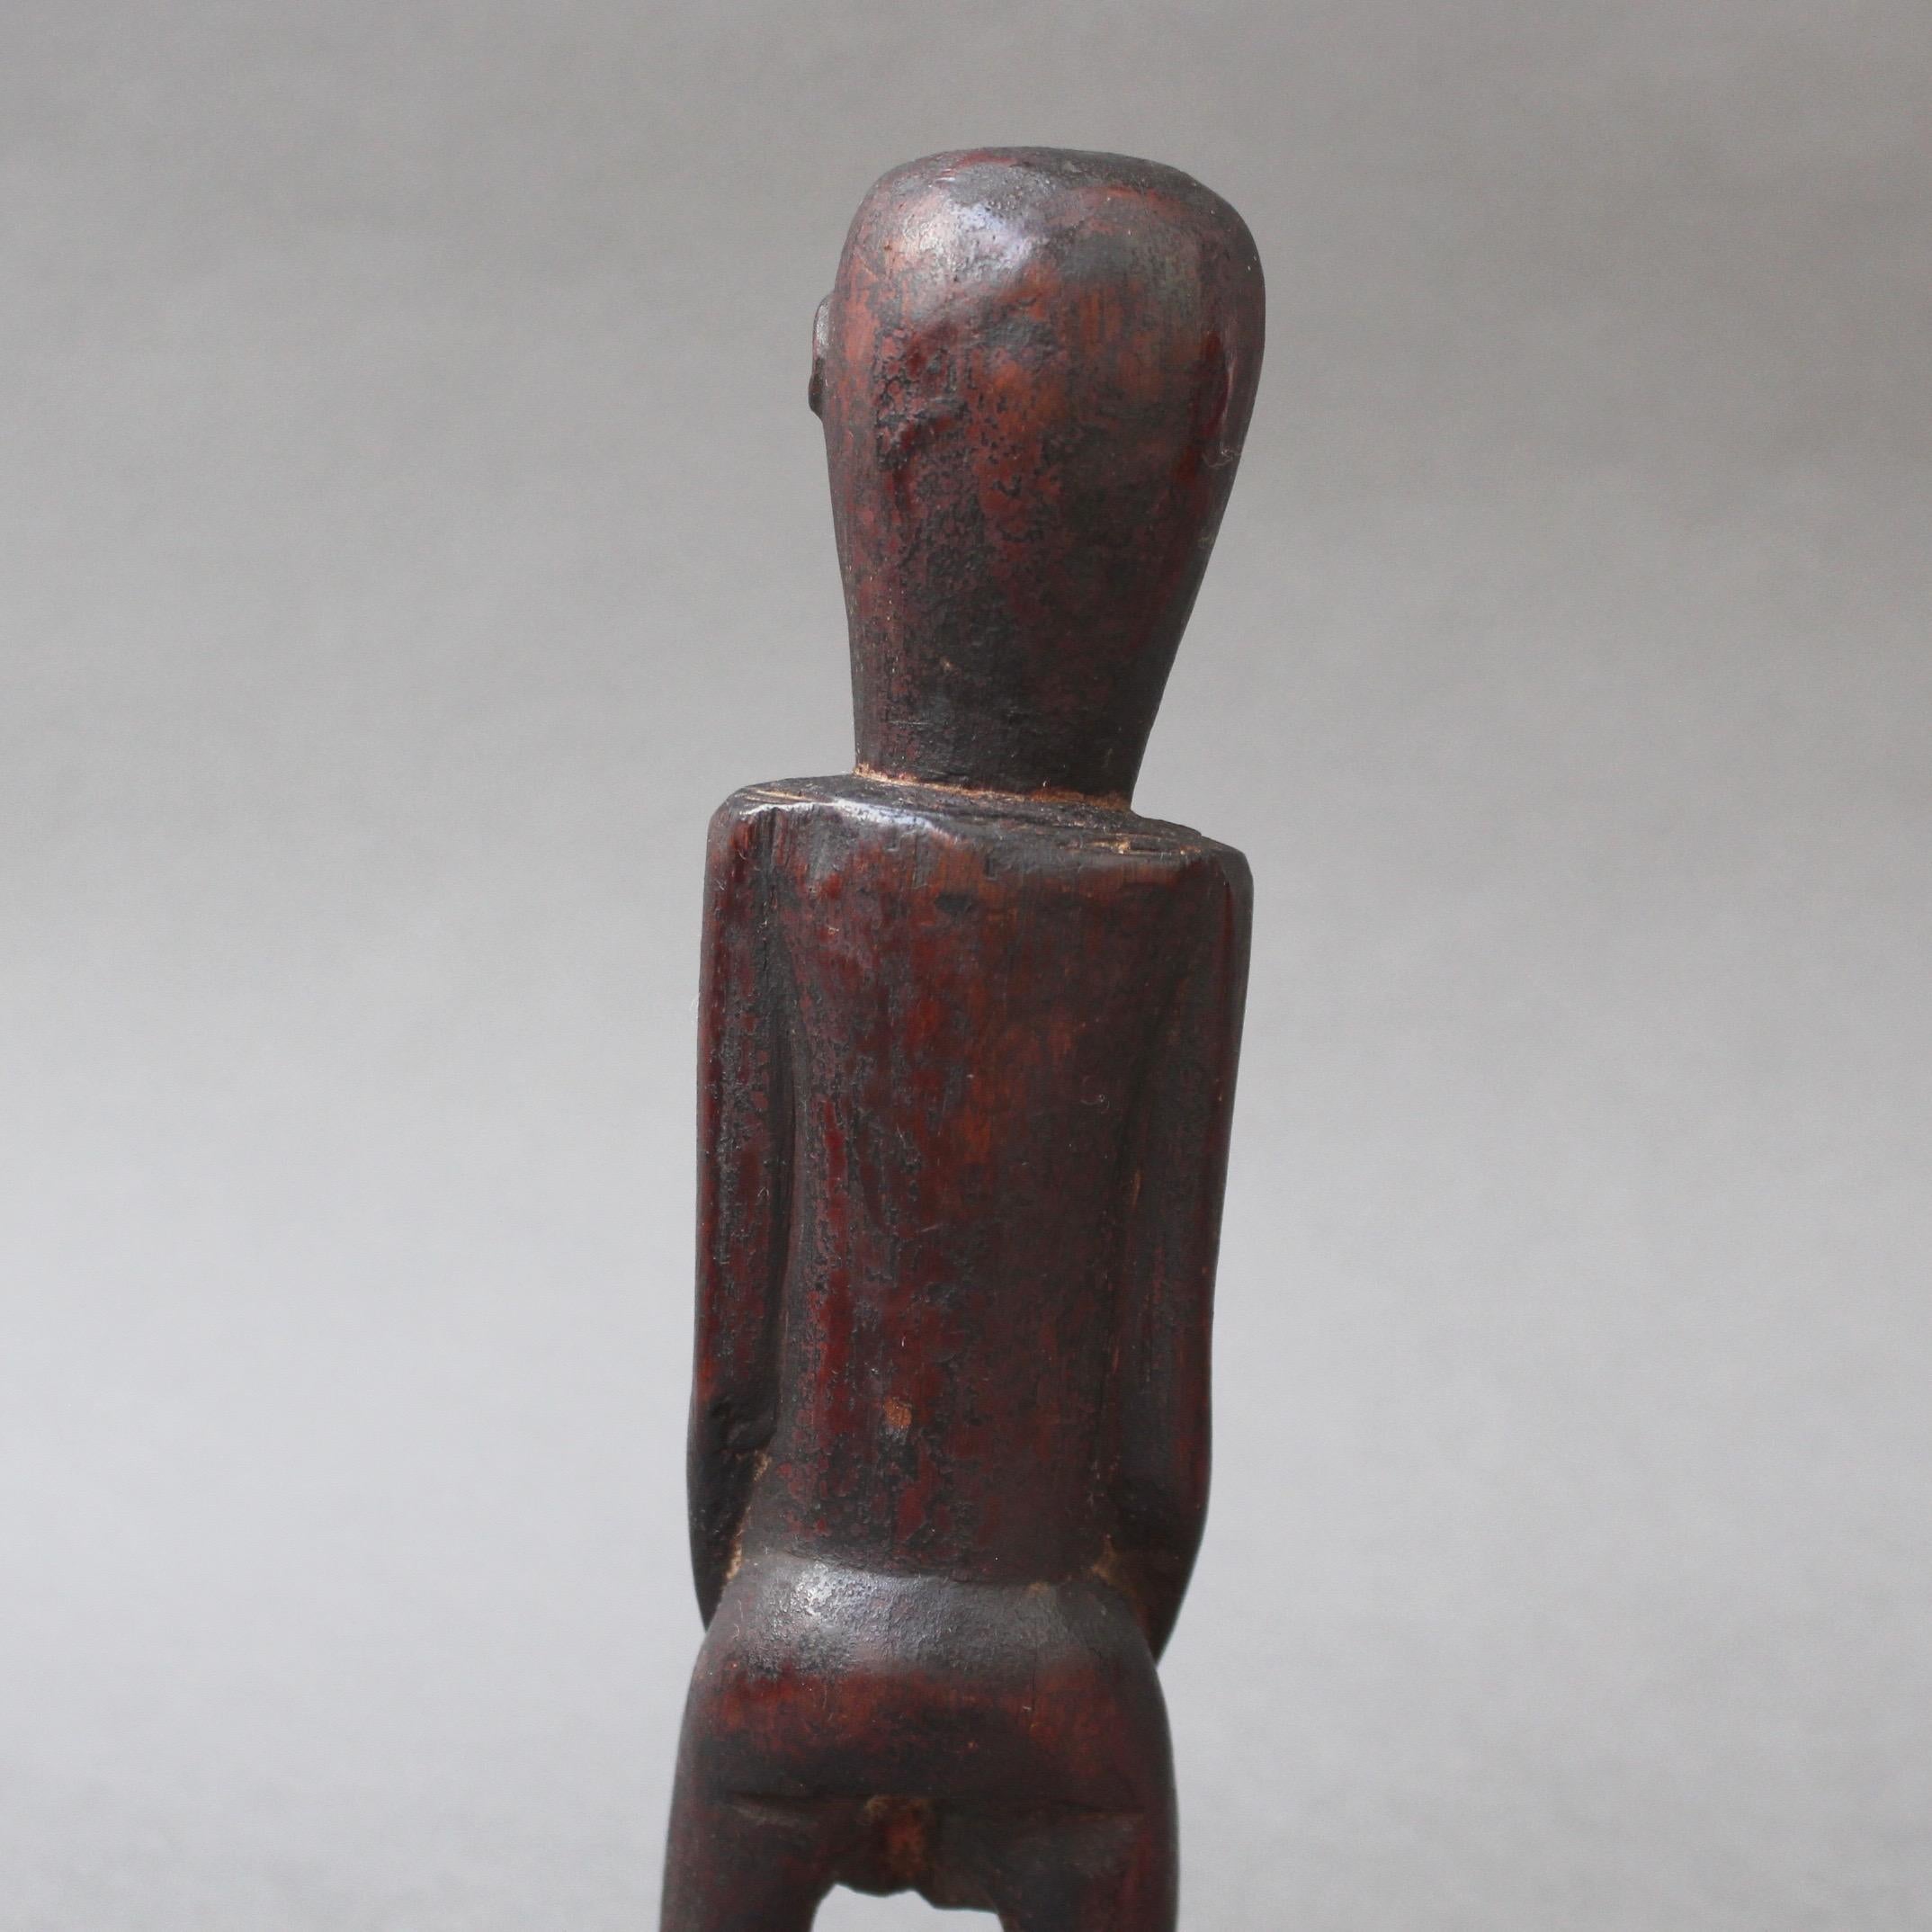 Wooden Sculpture or Carving of Fertility Figure from Sumba Island, Indonesia 7